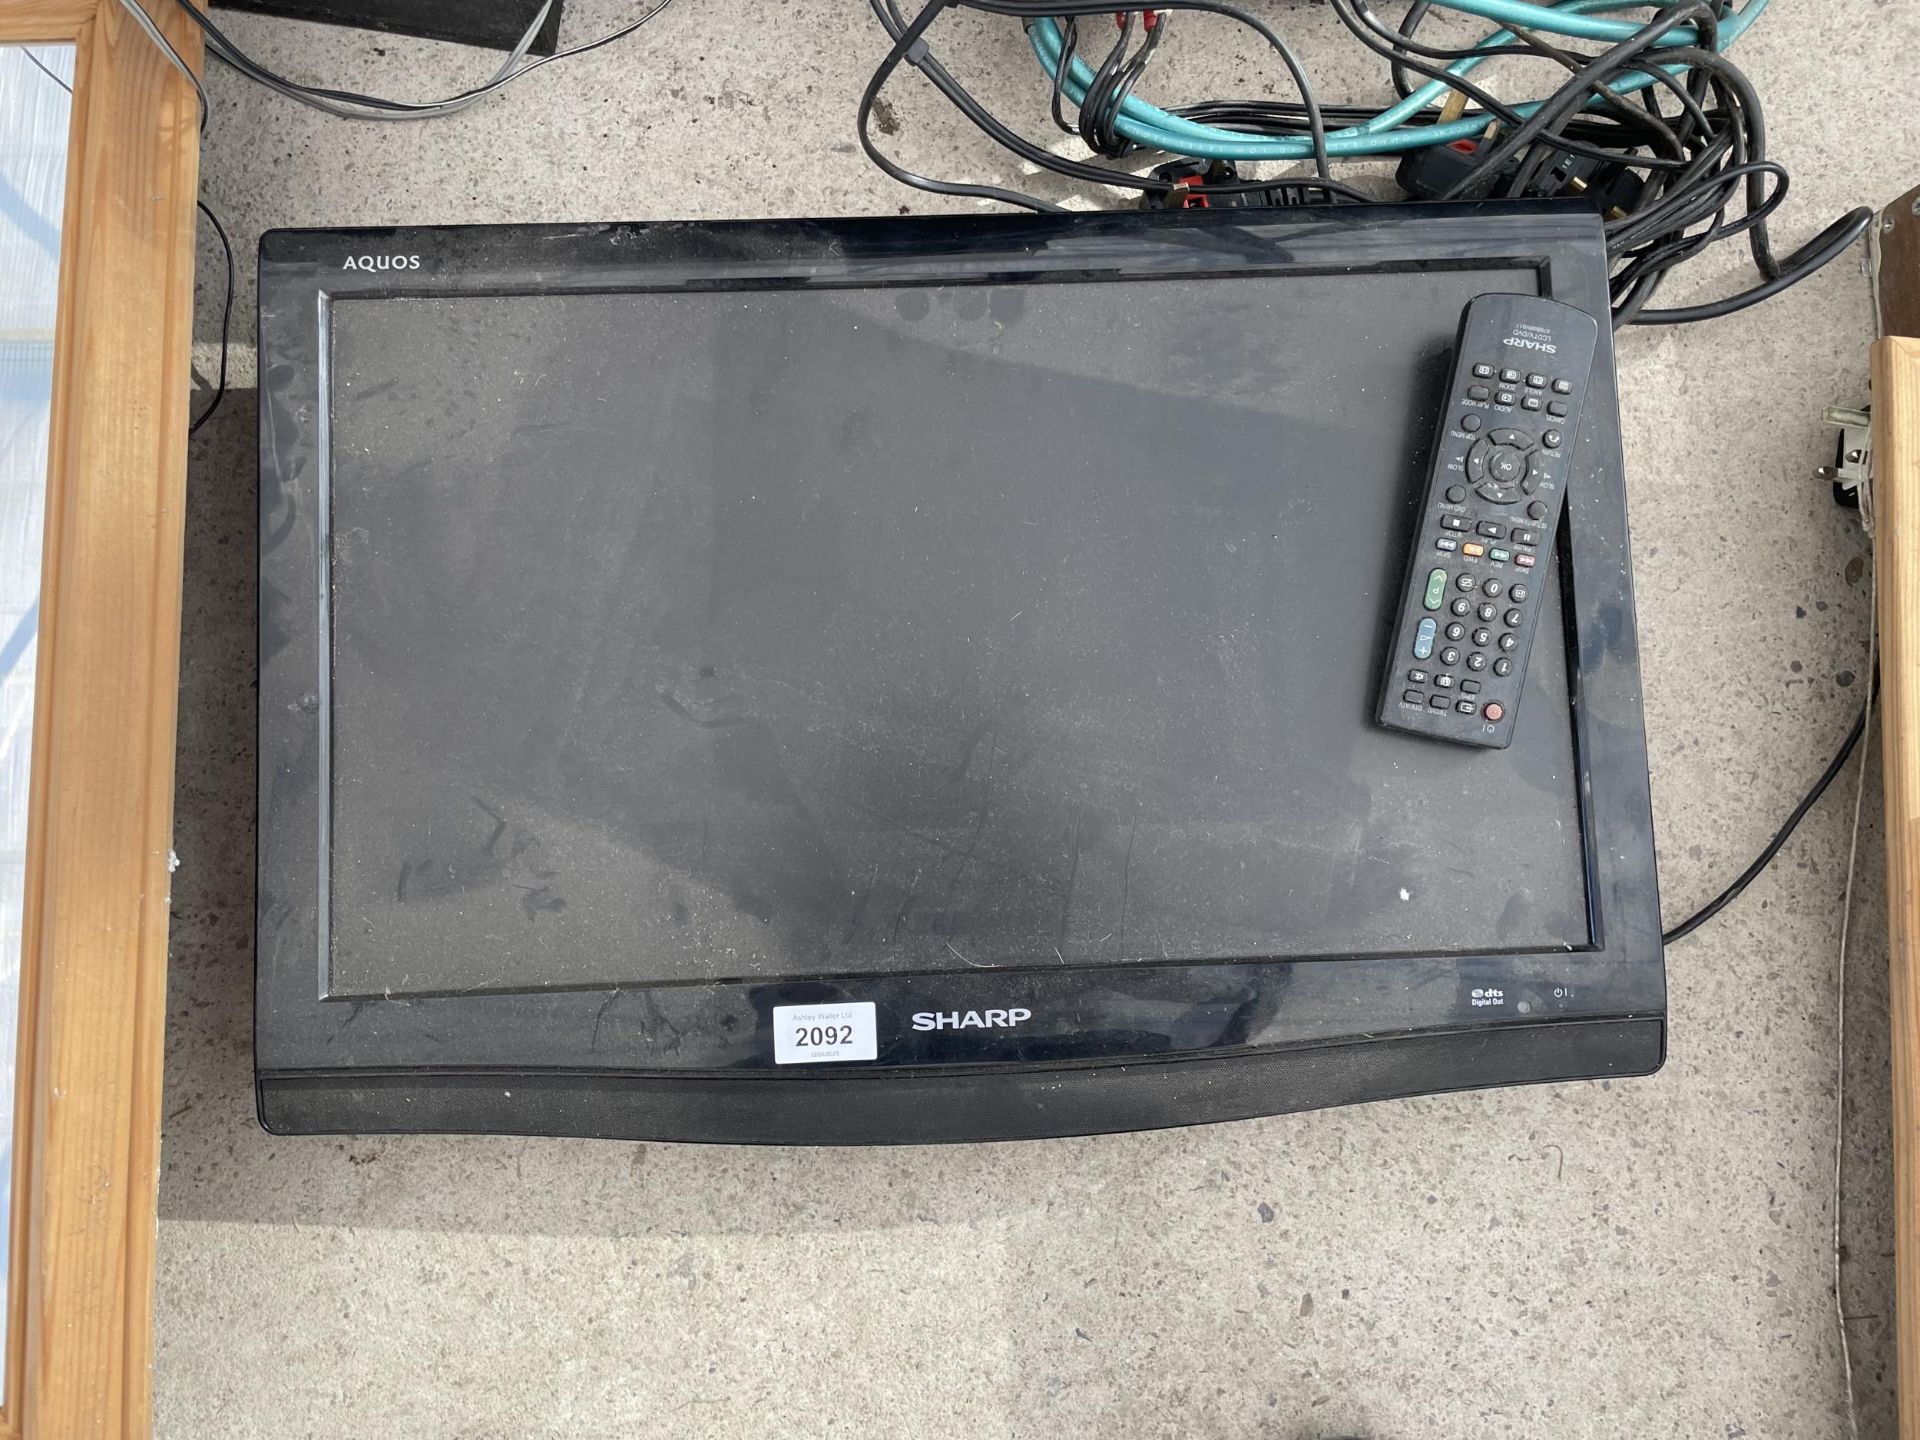 A SHARP 22" TELEVSION WITH BUILT IN DVD PLAYER AND REMOTE CONTROL